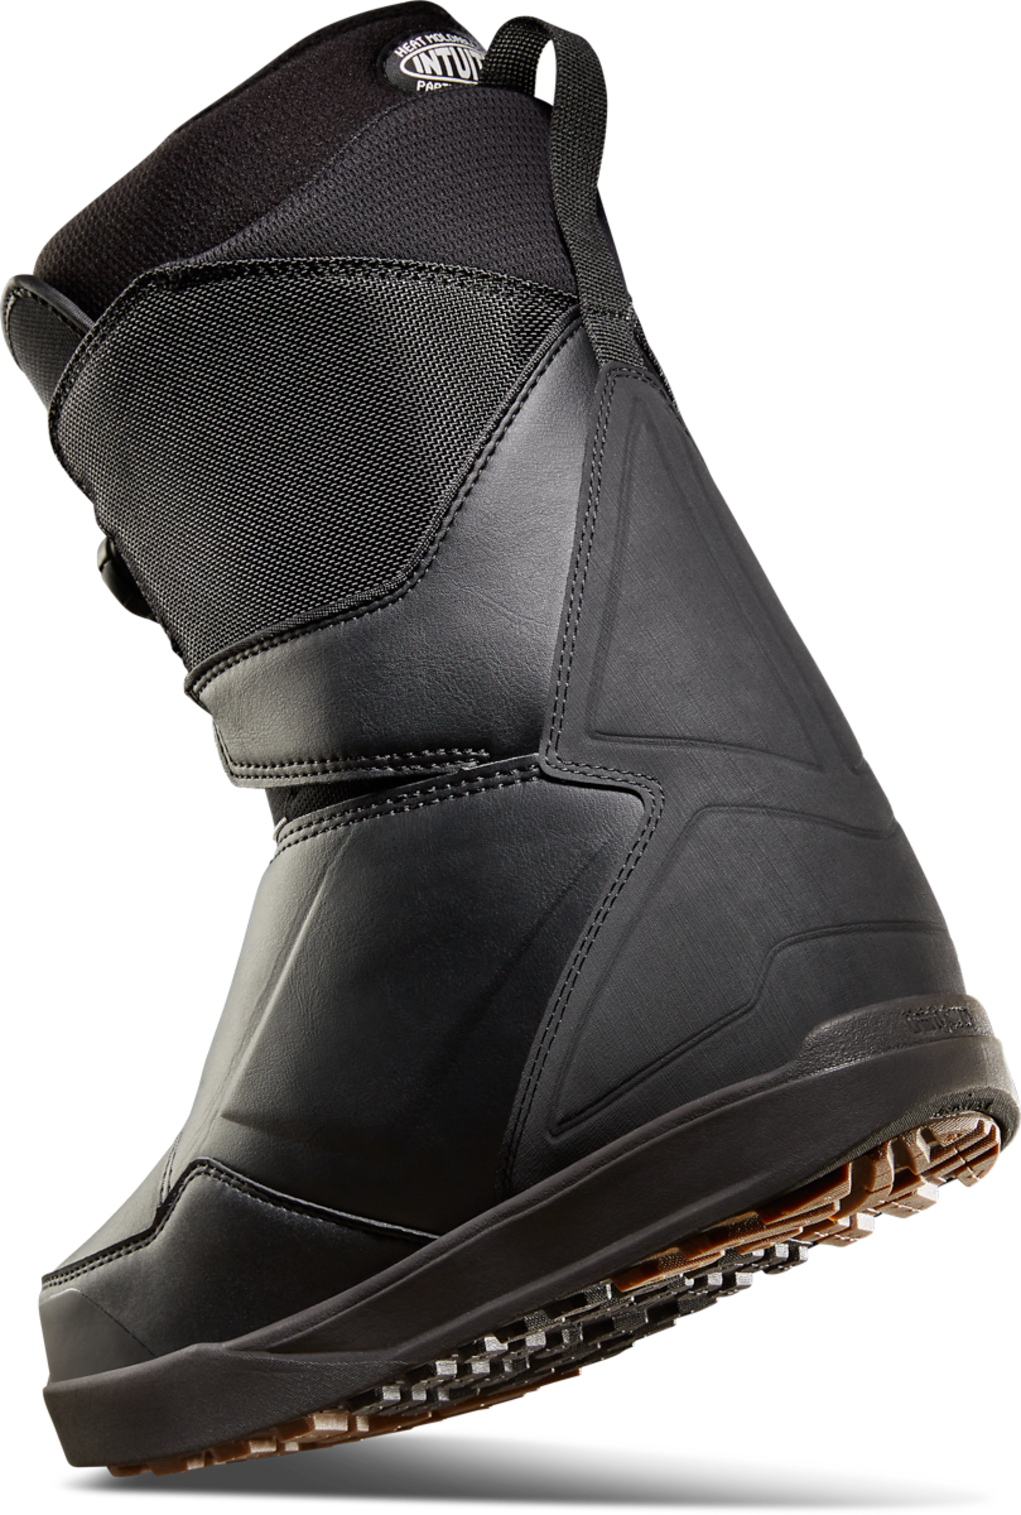 Thirtytwo Men's Lashed Double Boa '22 Black Snow Boots